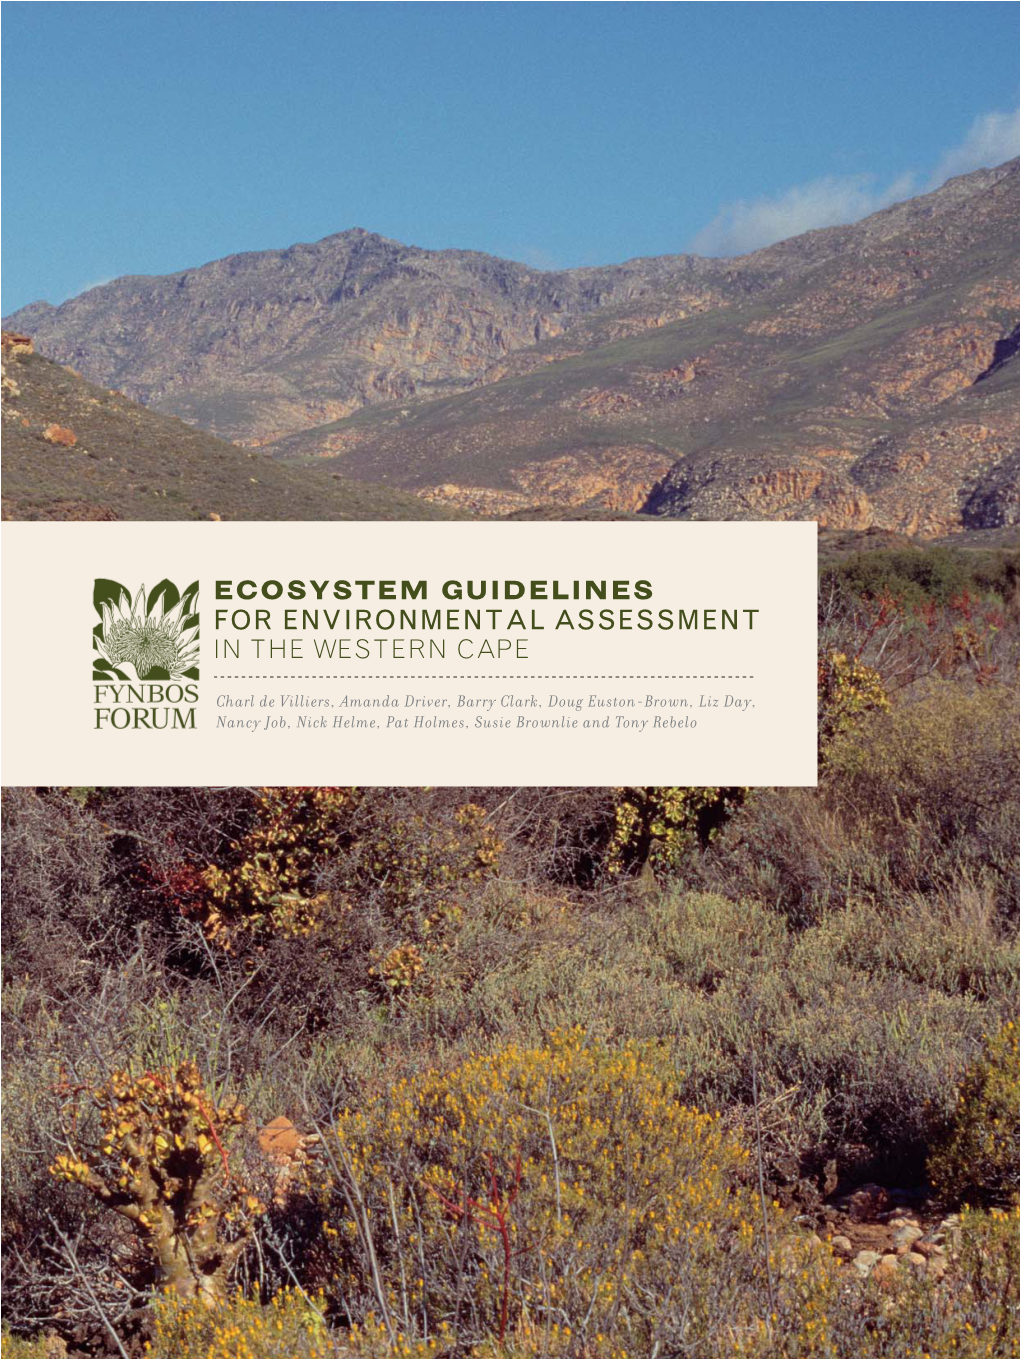 Fynbos Forum Ecosystem Guidelines for Environmental Assessment in the Western Cape